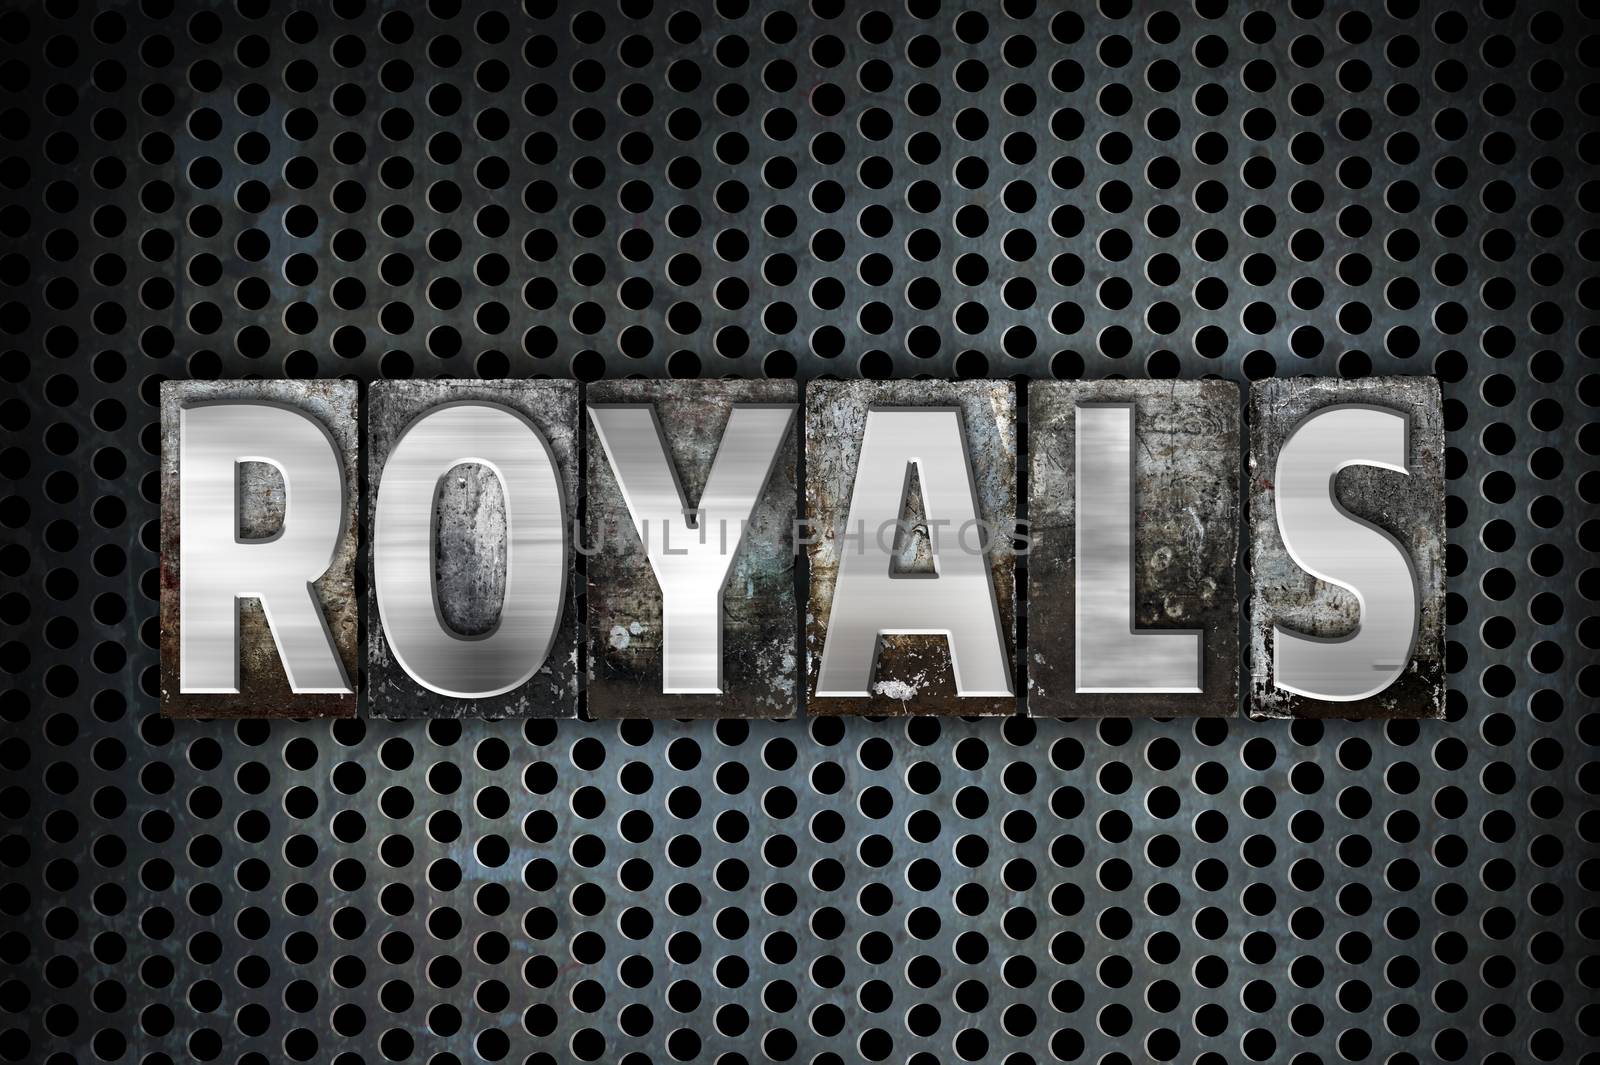 The word "Royals" written in vintage metal letterpress type on a black industrial grid background.